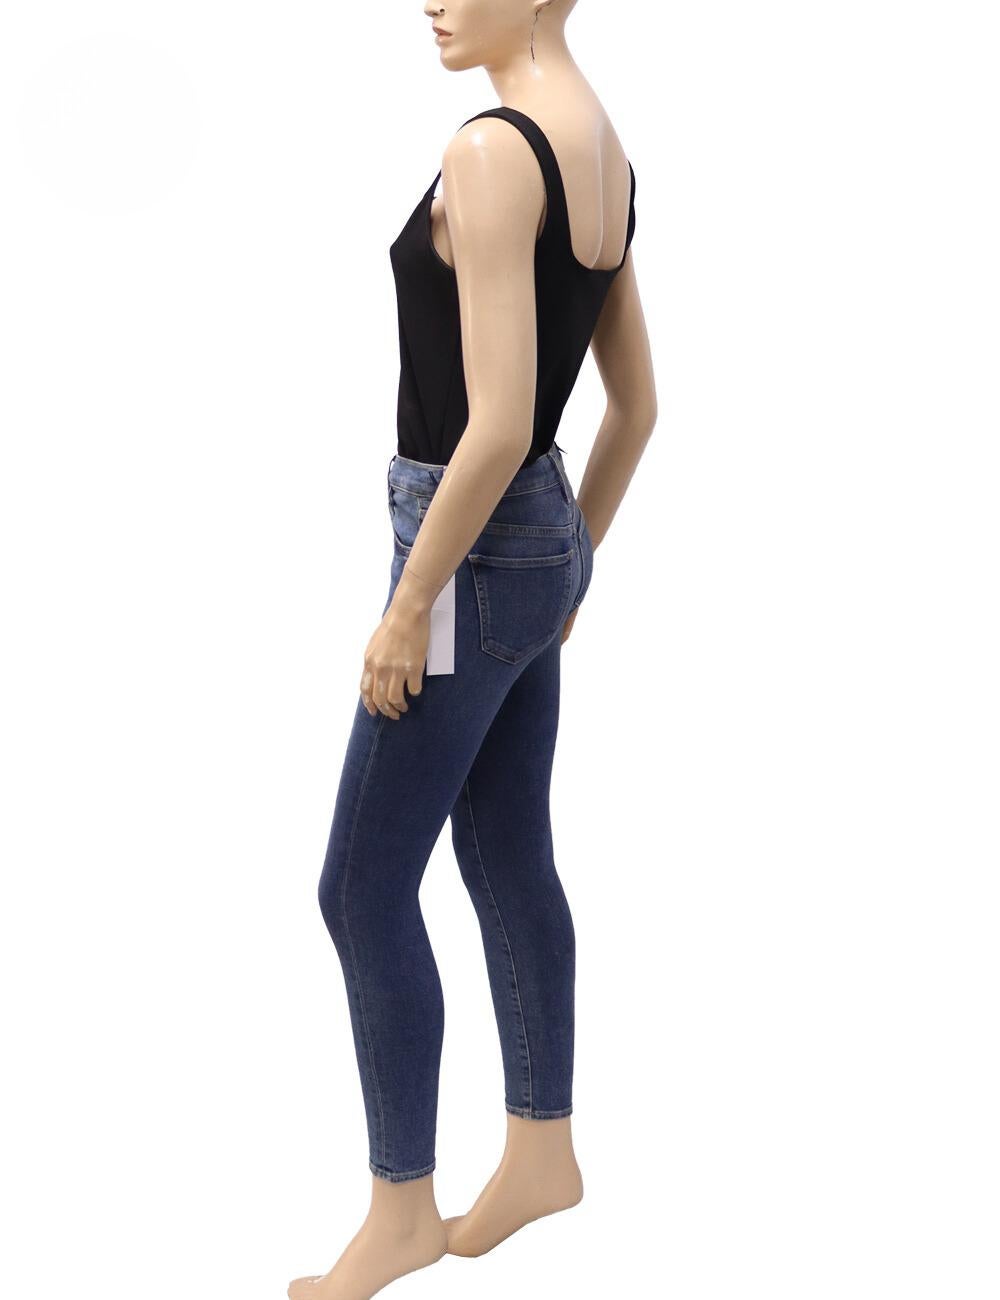 Joe's Jeans The Charlie High Rise Skinny Ankle Jeans.

Material: Cotton 
Size: 25 / US 0 / XS
Condition: New with Tags